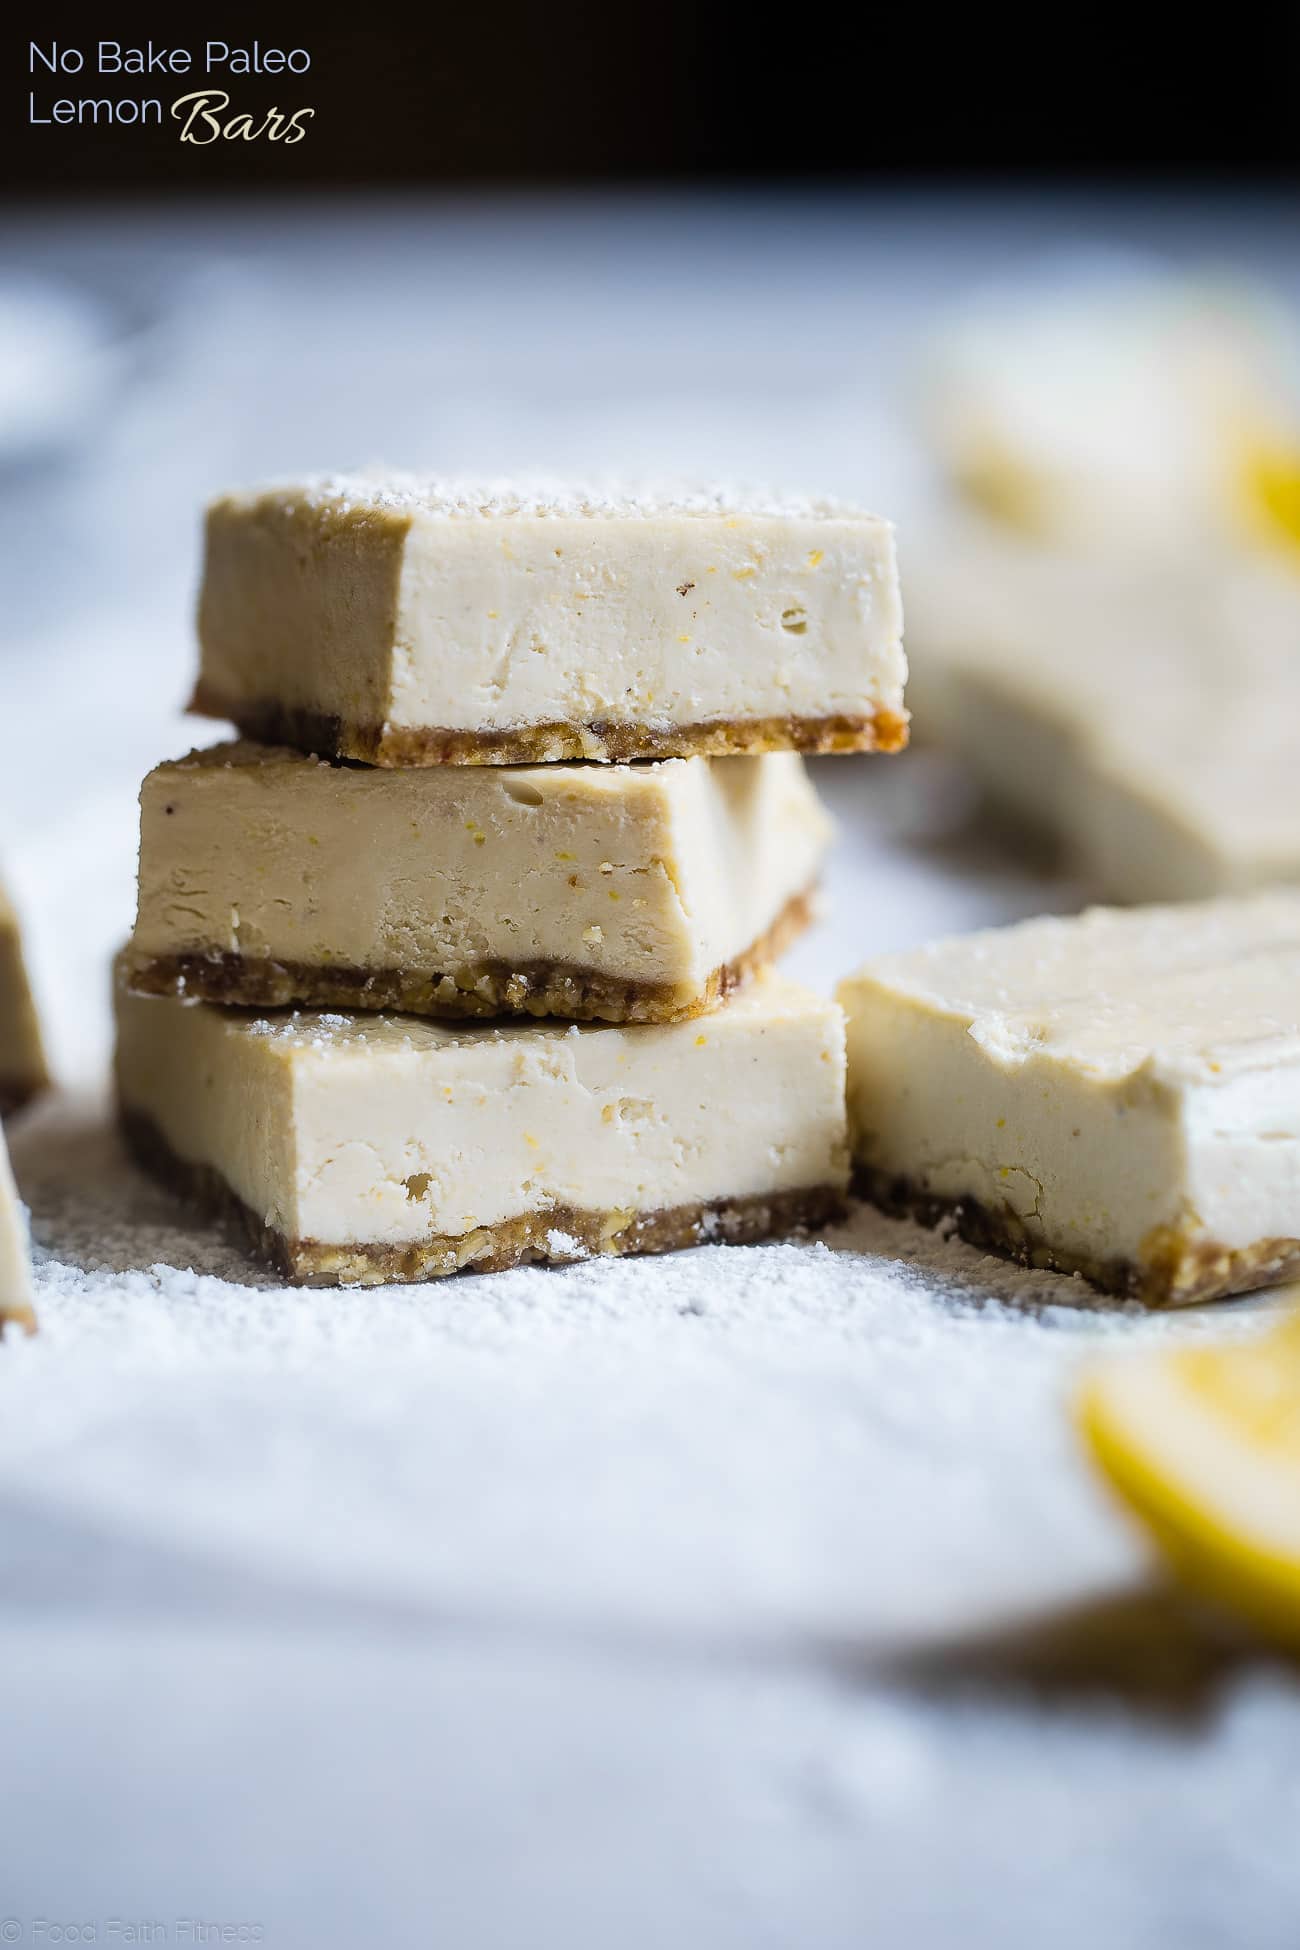 No Bake Paleo Lemon Bars - So creamy you won't believe they're gluten, grain, refined sugar and dairy free! They're only 4 ingredients, so easy to make and so delicious! | Foodfaithfitness.com | @FoodFaithFit